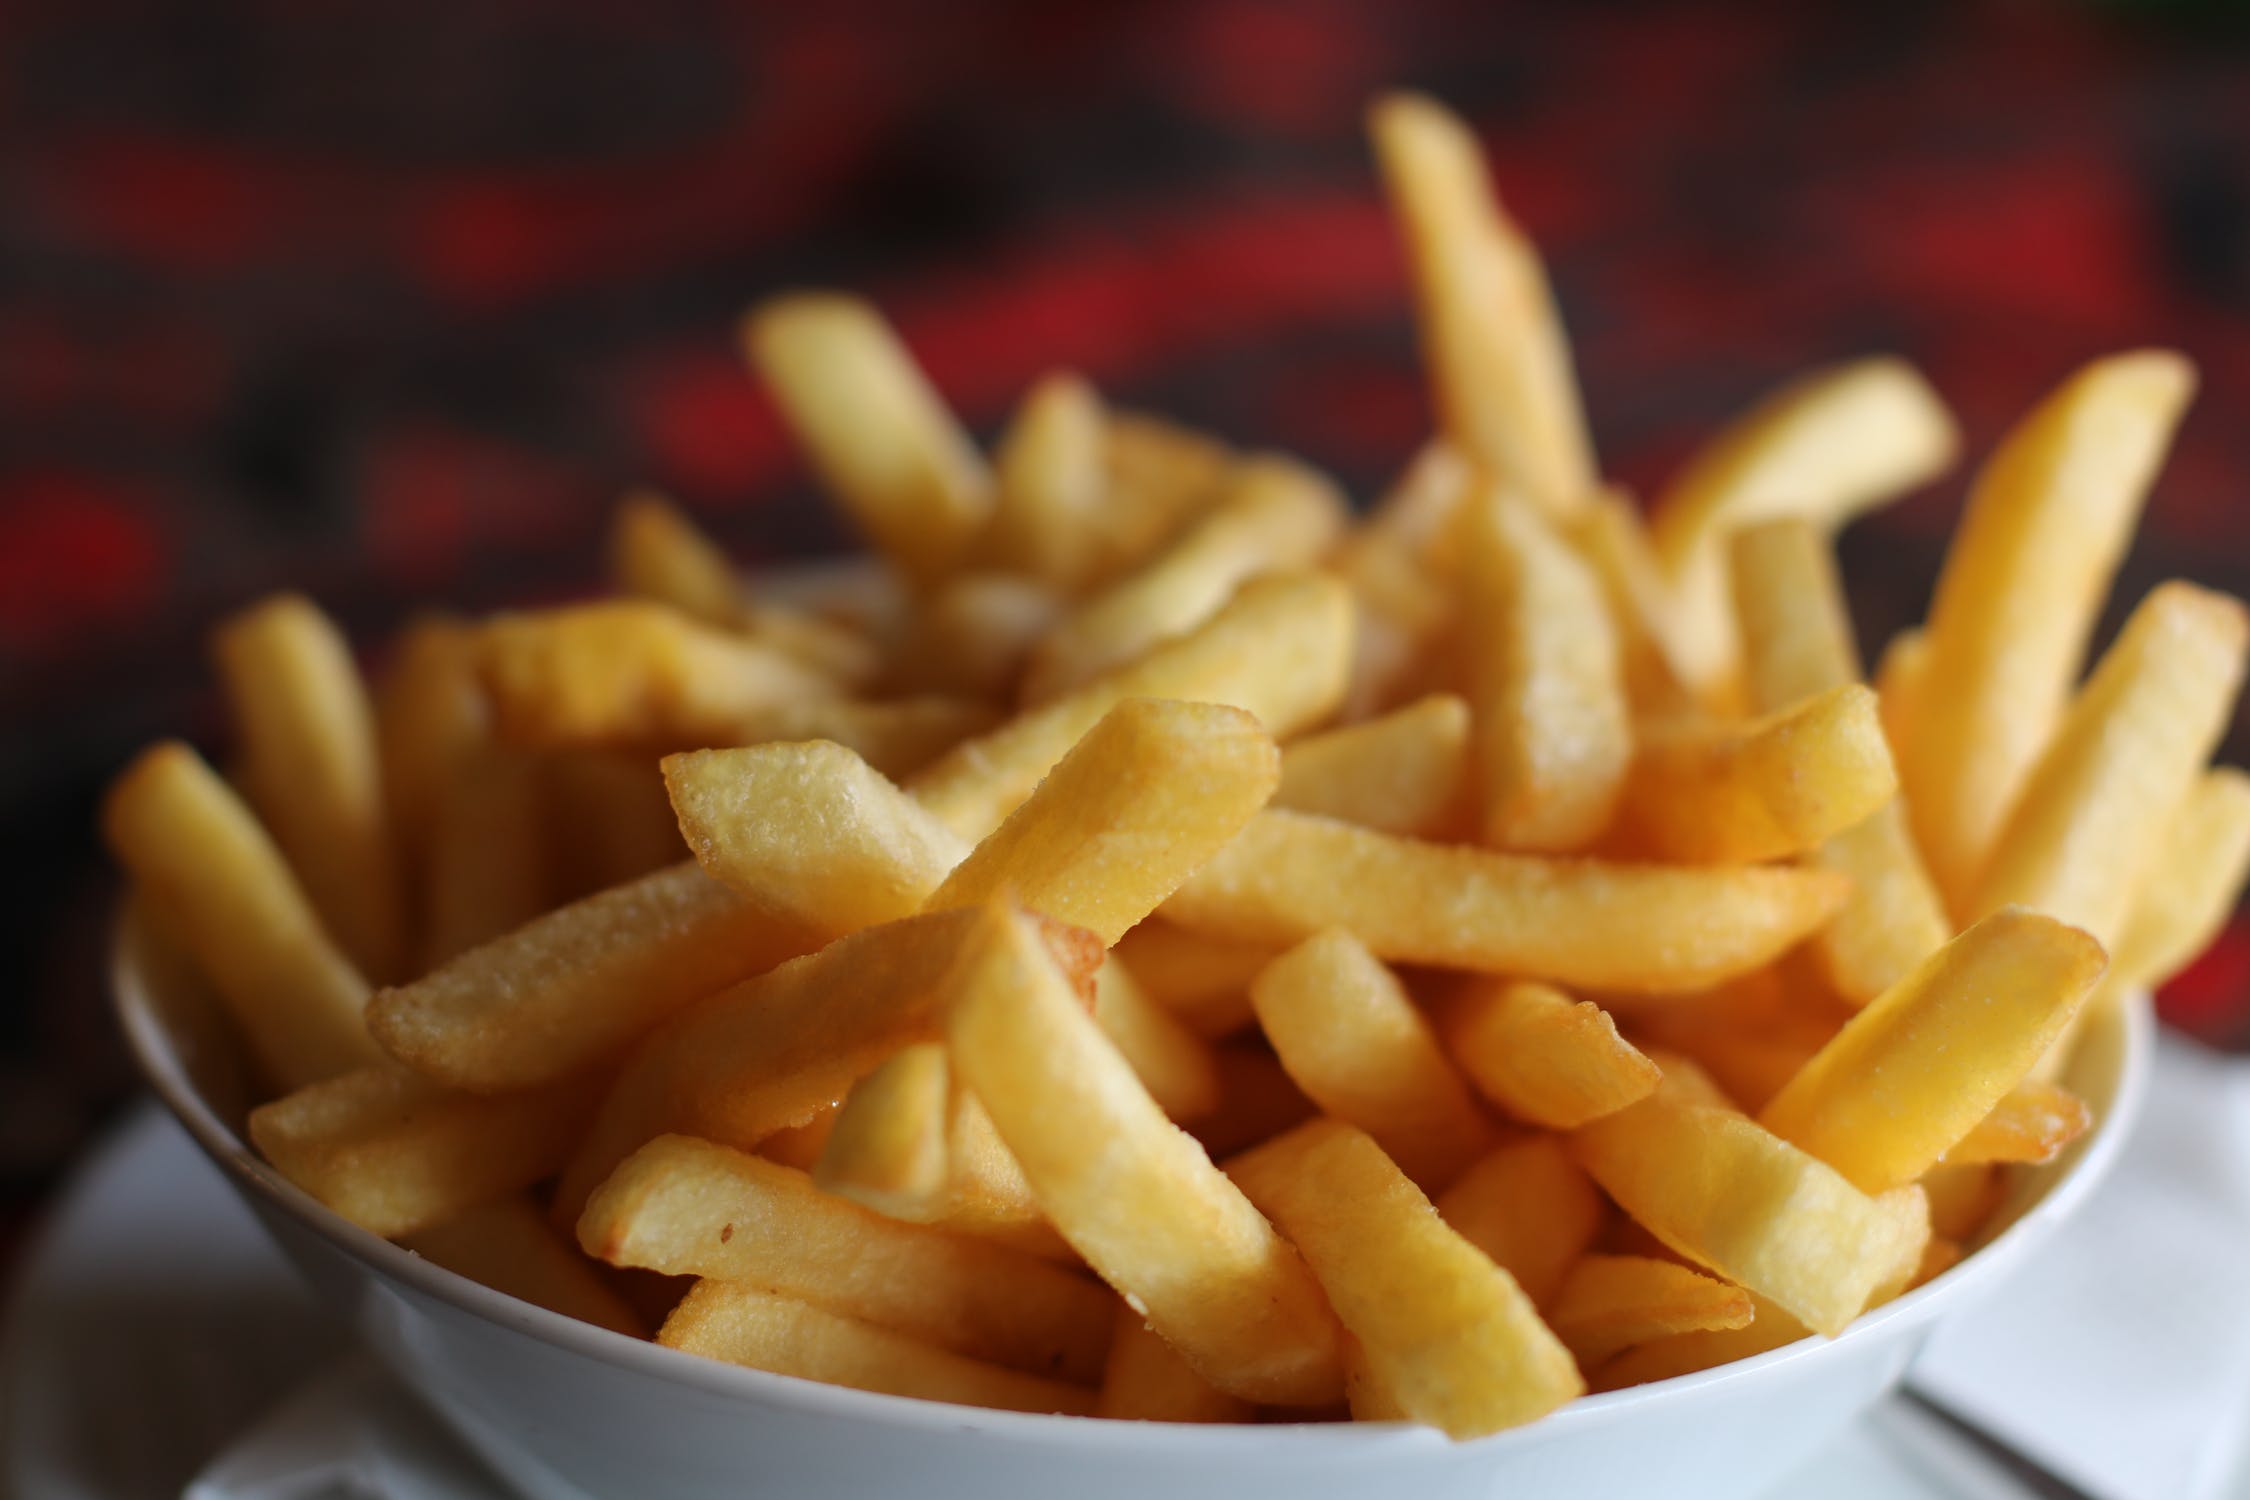 Why Are French Fries Called French Fries?